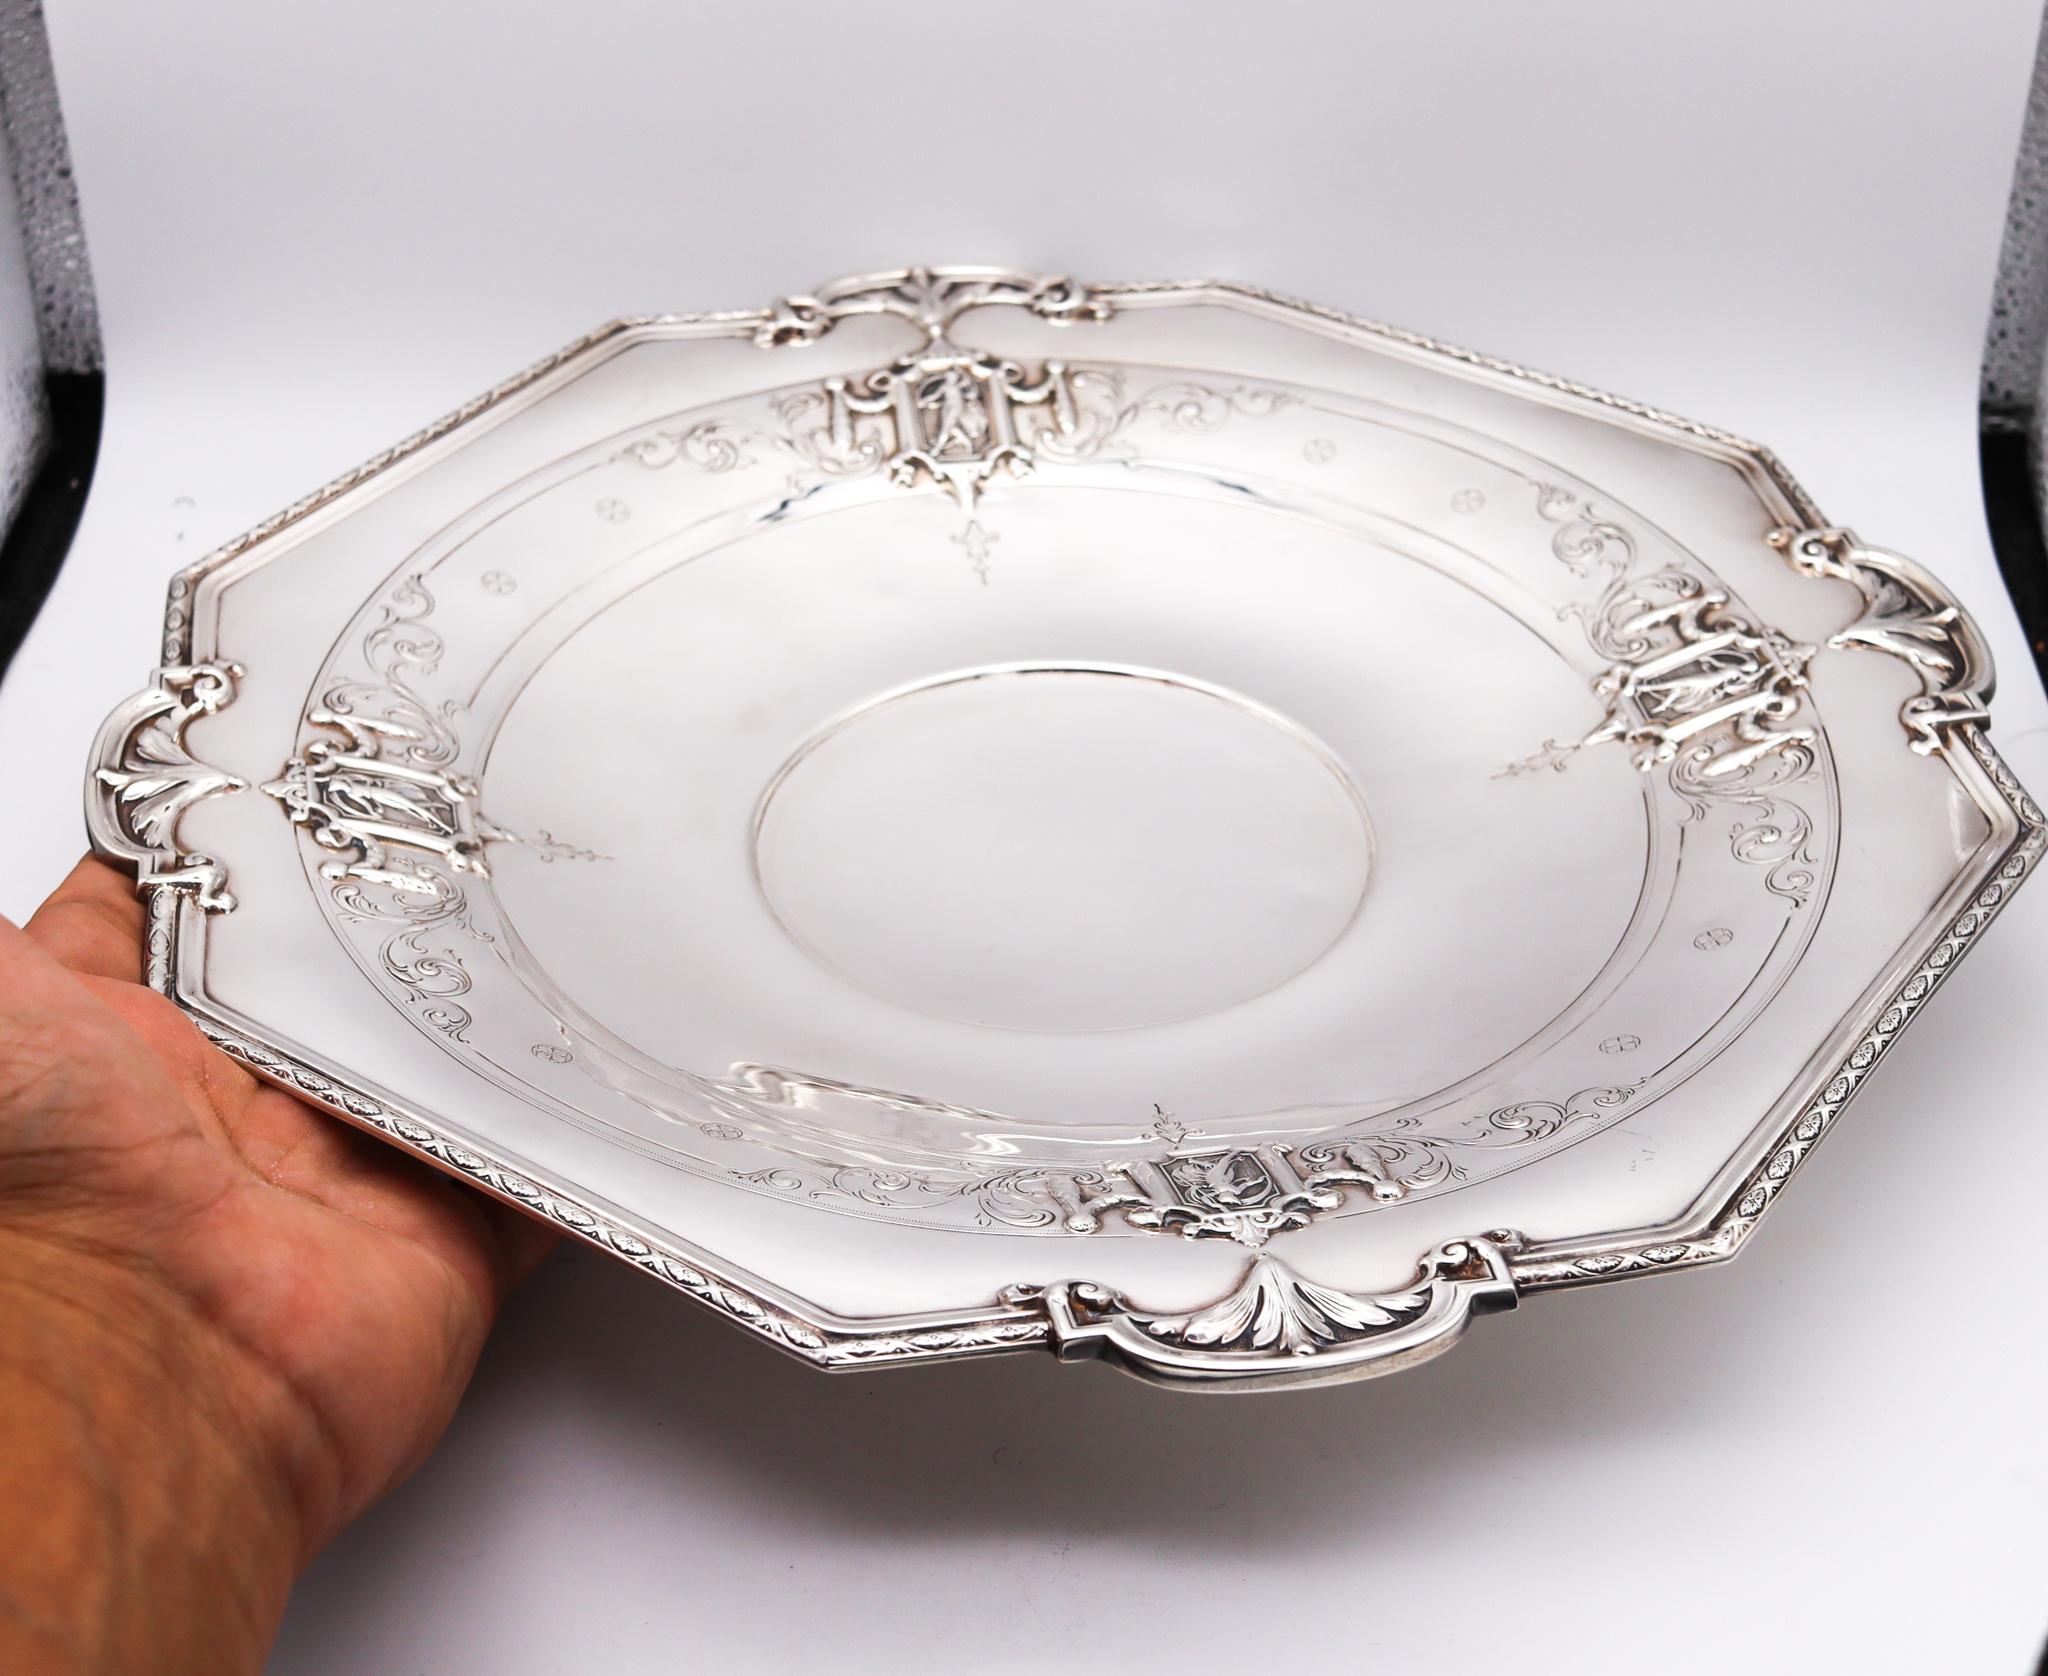 An art nouveau centerpiece designed by Towle & Co.

Beautiful highly elaborated piece, created in the United States by the silversmiths makers Towle & Company back in the end of the 19th century, circa 1895. This fabulous octagonal tray was